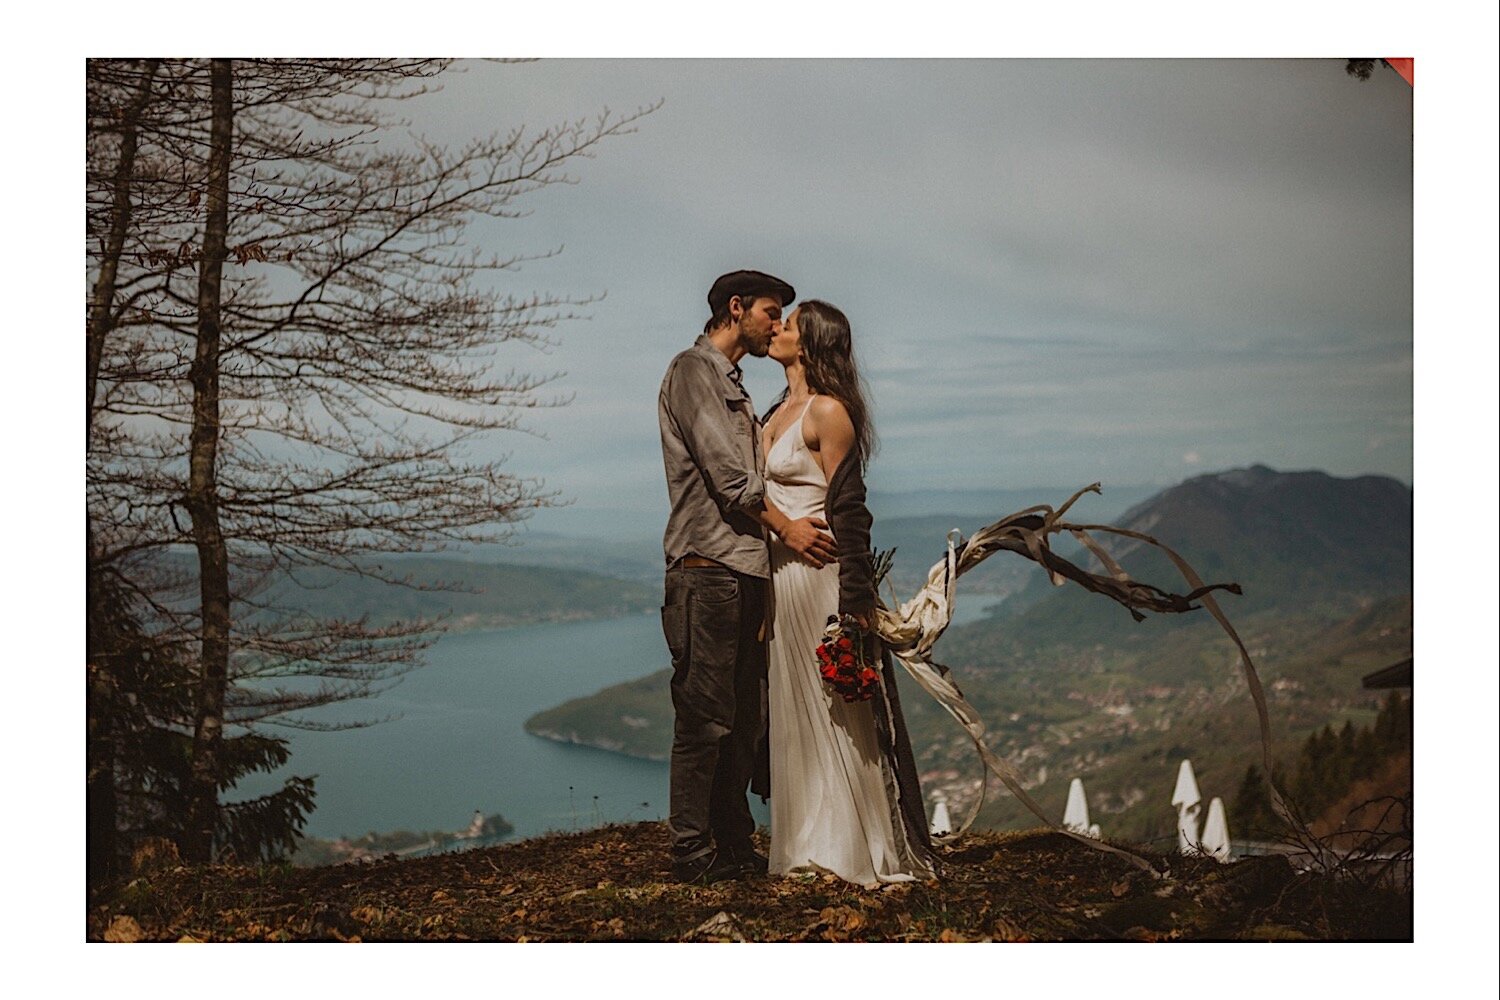 04_TWS-107_annecy_french_elope_alps_lake_couple_photography_intimate_flowers_elopment_wedding.jpg